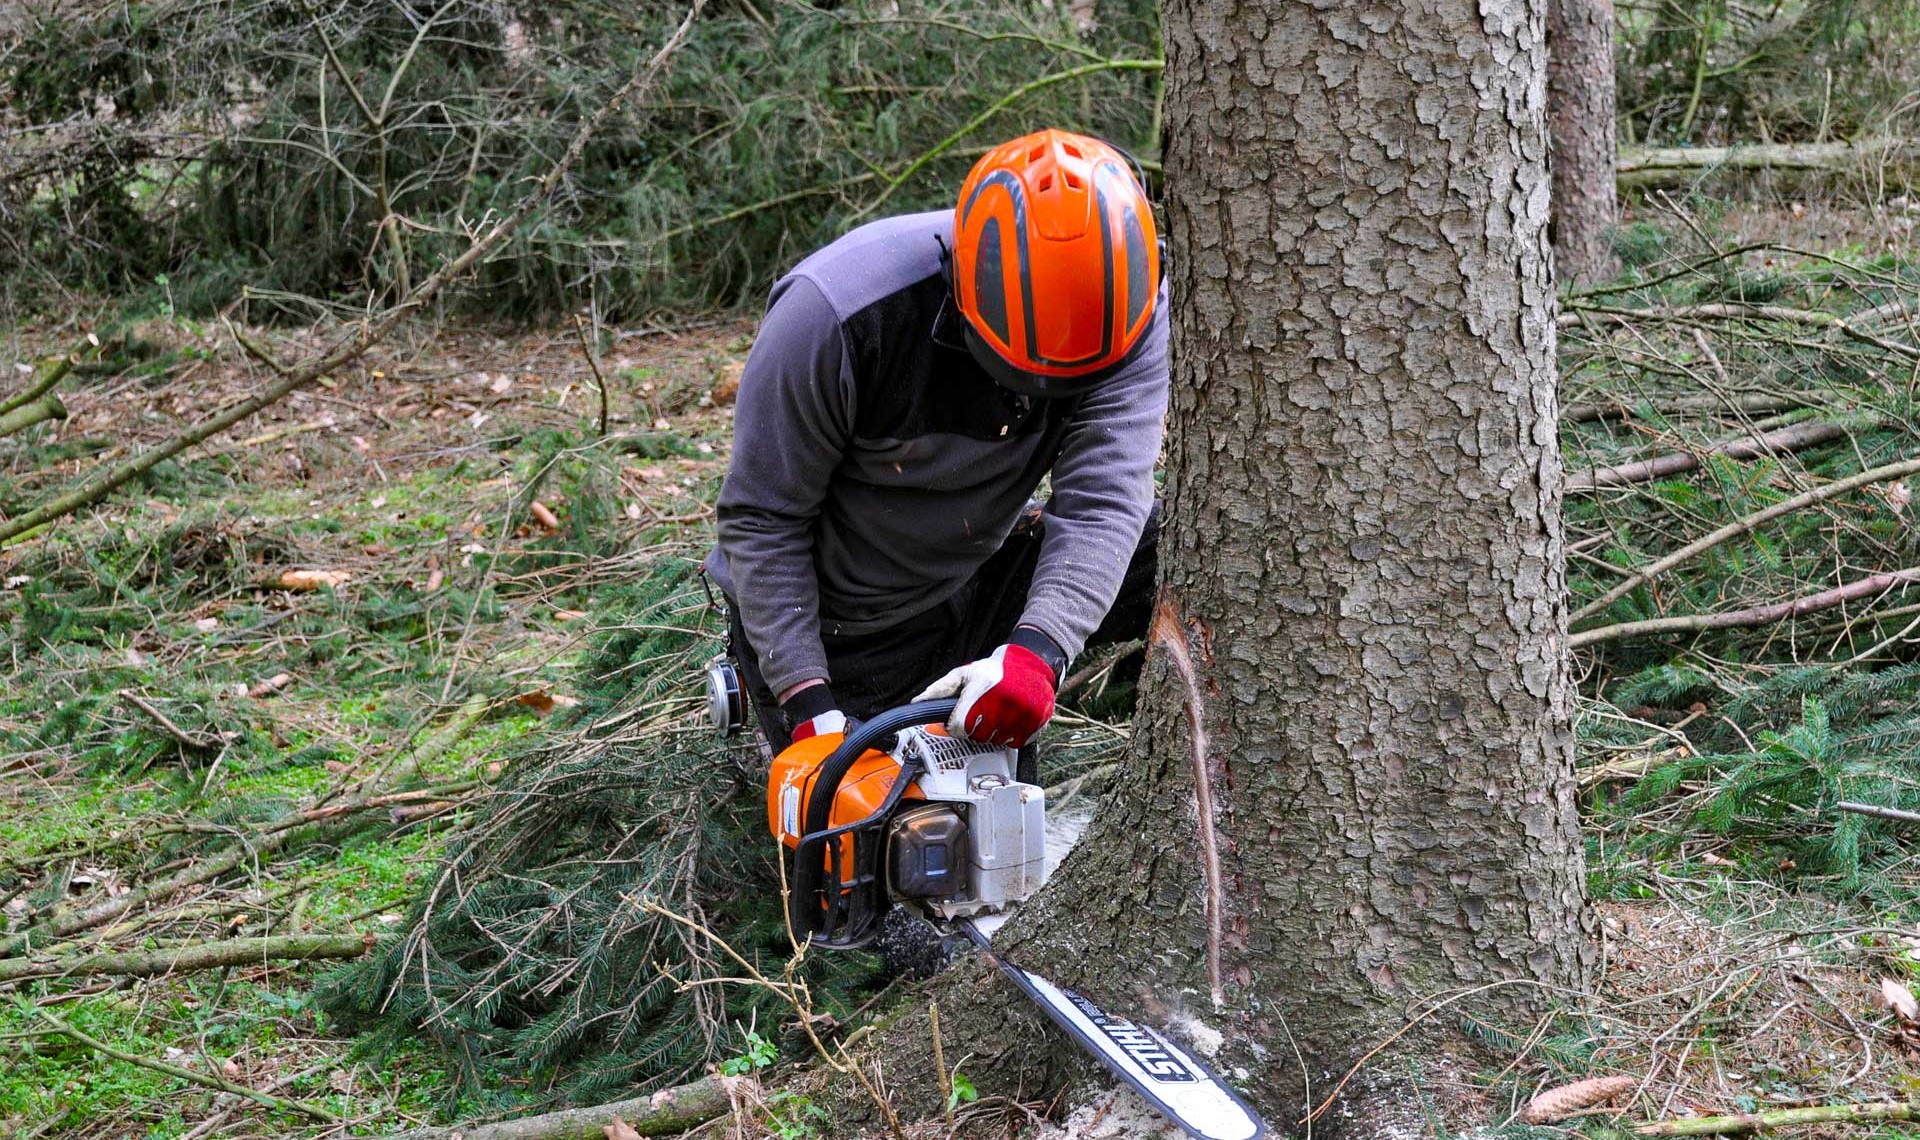 Man wearing safety equipment and chainsaw felling a tree.